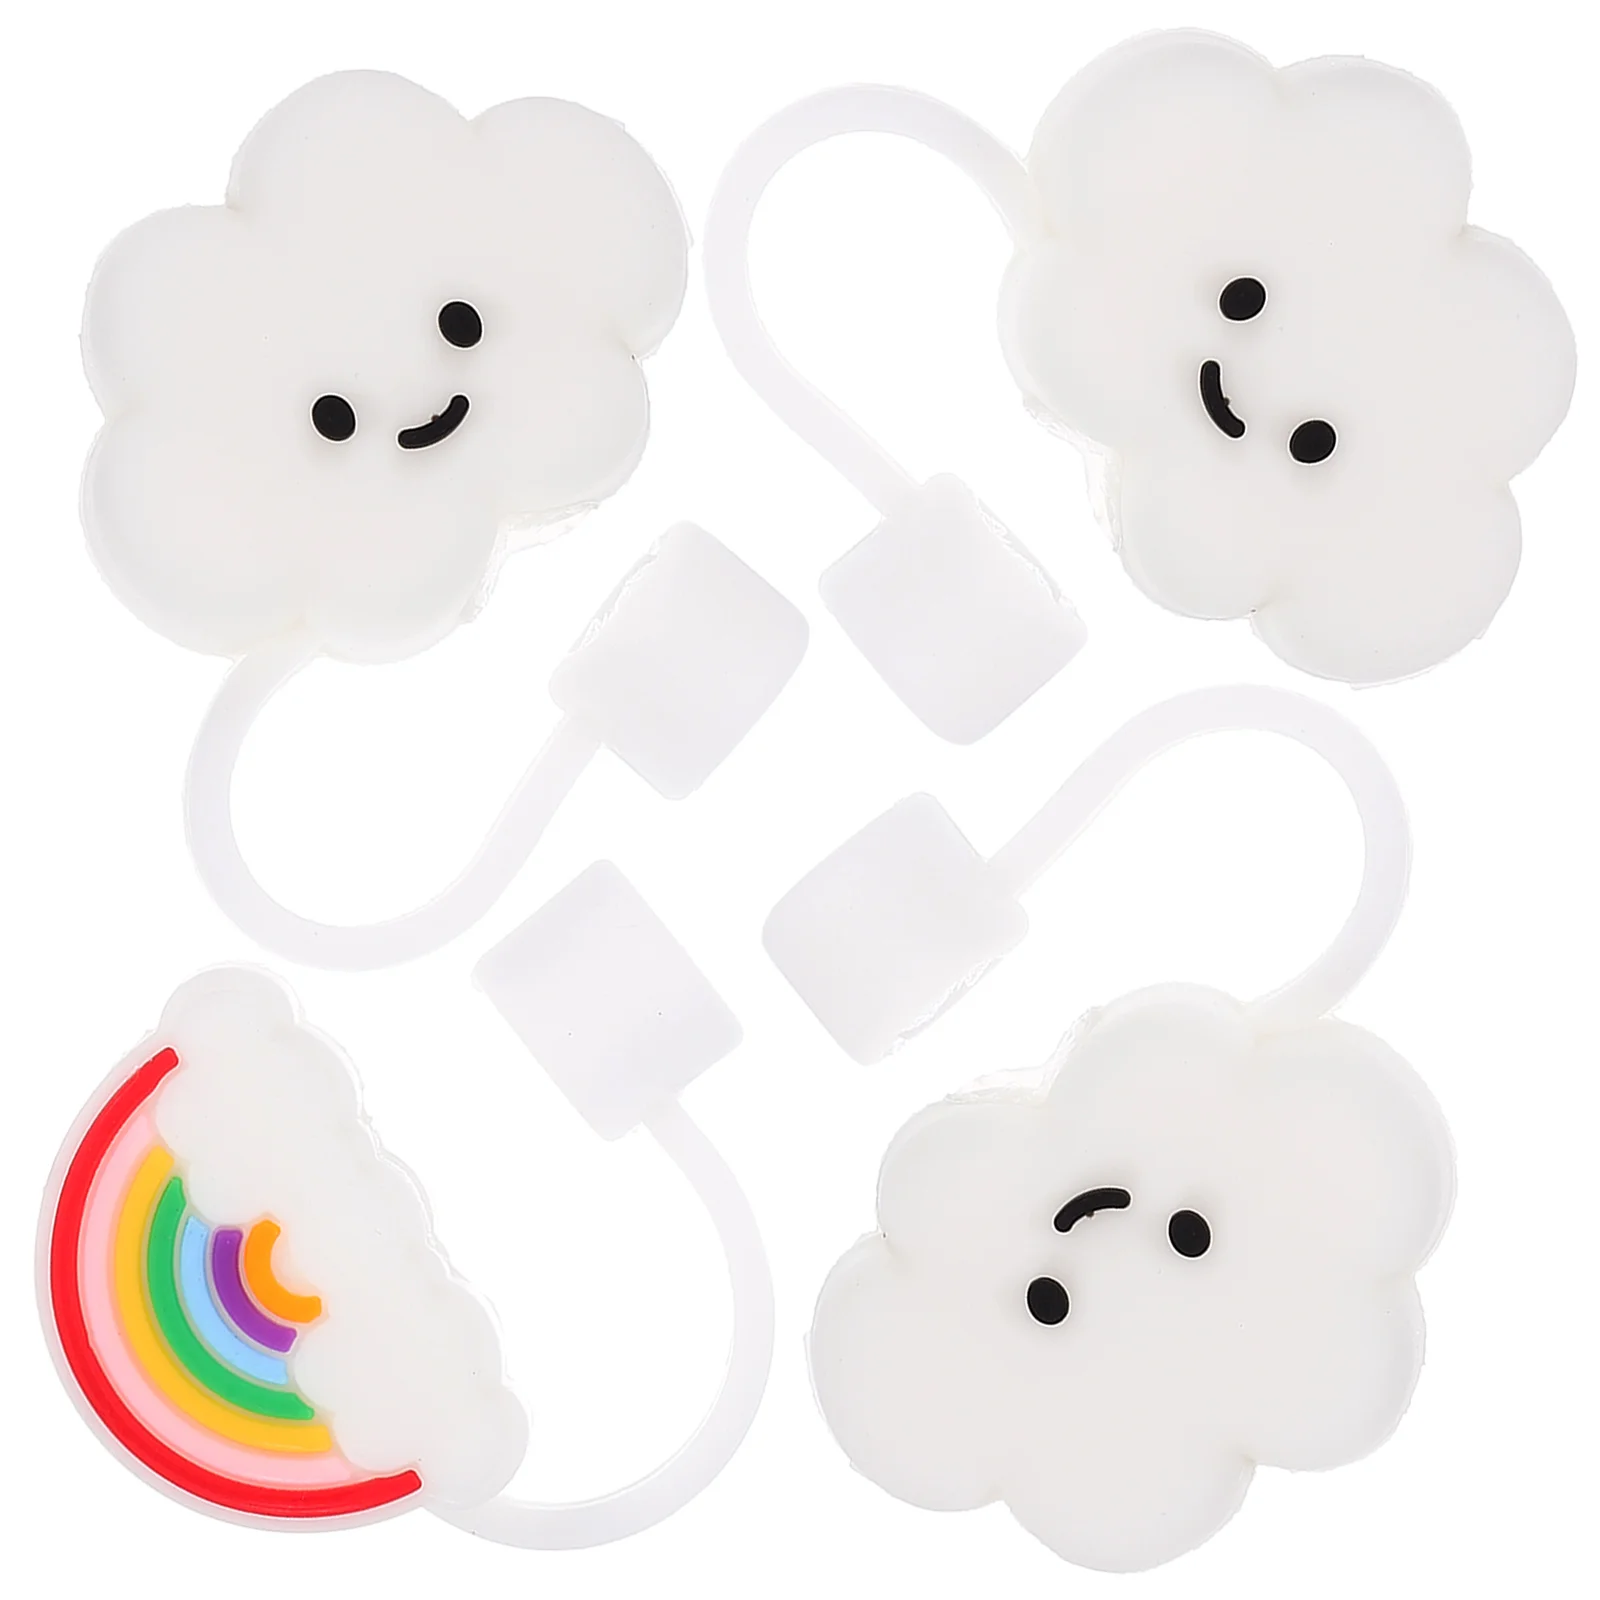 

4pcs Cloud Straw Tips Cover Rainbow Straw Tip Reusable Drinking Straw Covers Plugs